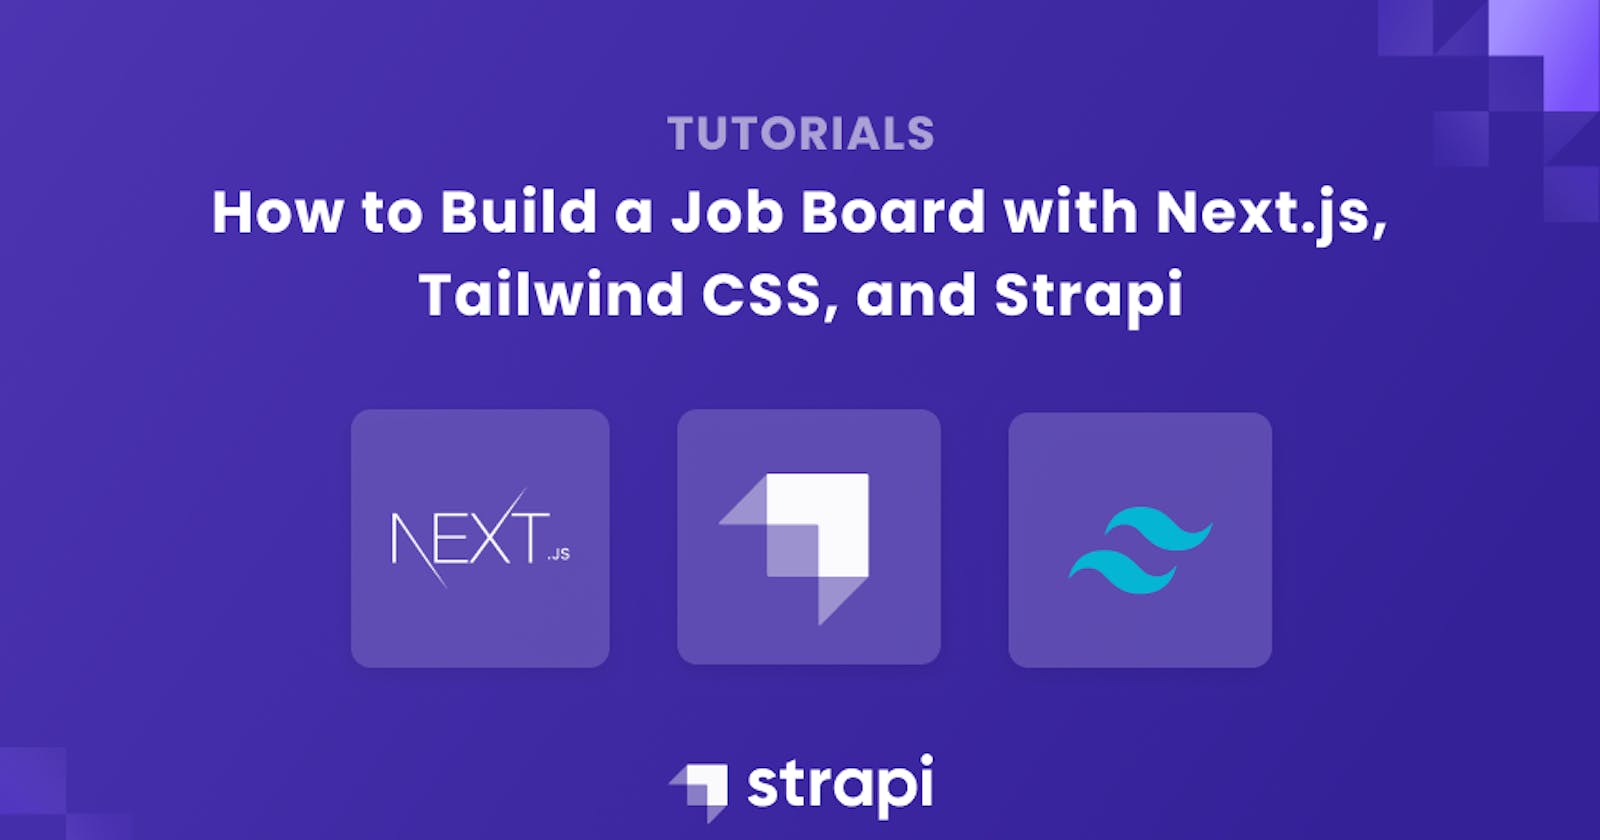 How to Build a Job Board with Next.js, Tailwind CSS, and Strapi